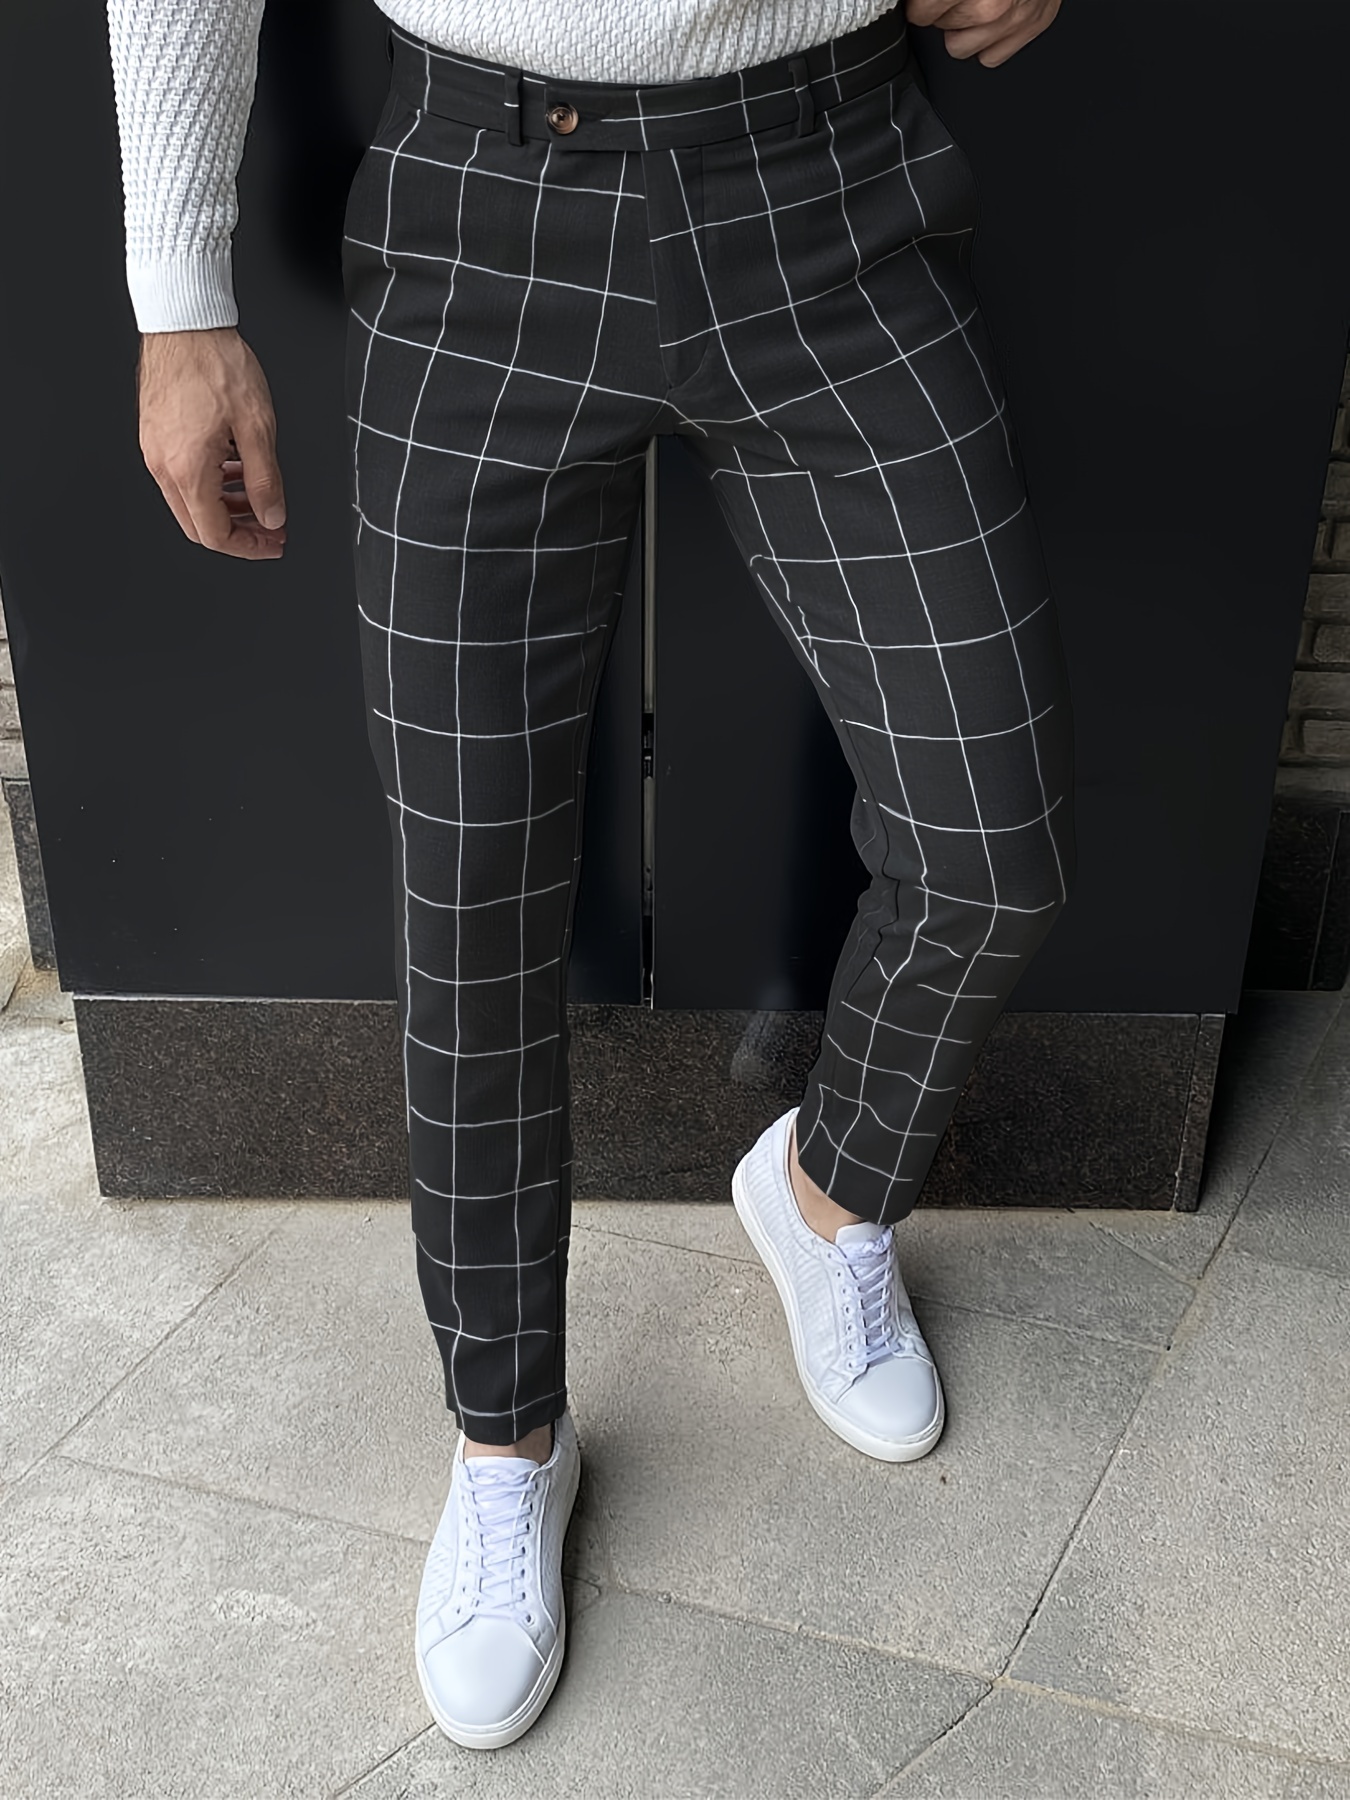 Mens Slim Plaid Checkered Pants Stretch Casual Work Pants Trousers